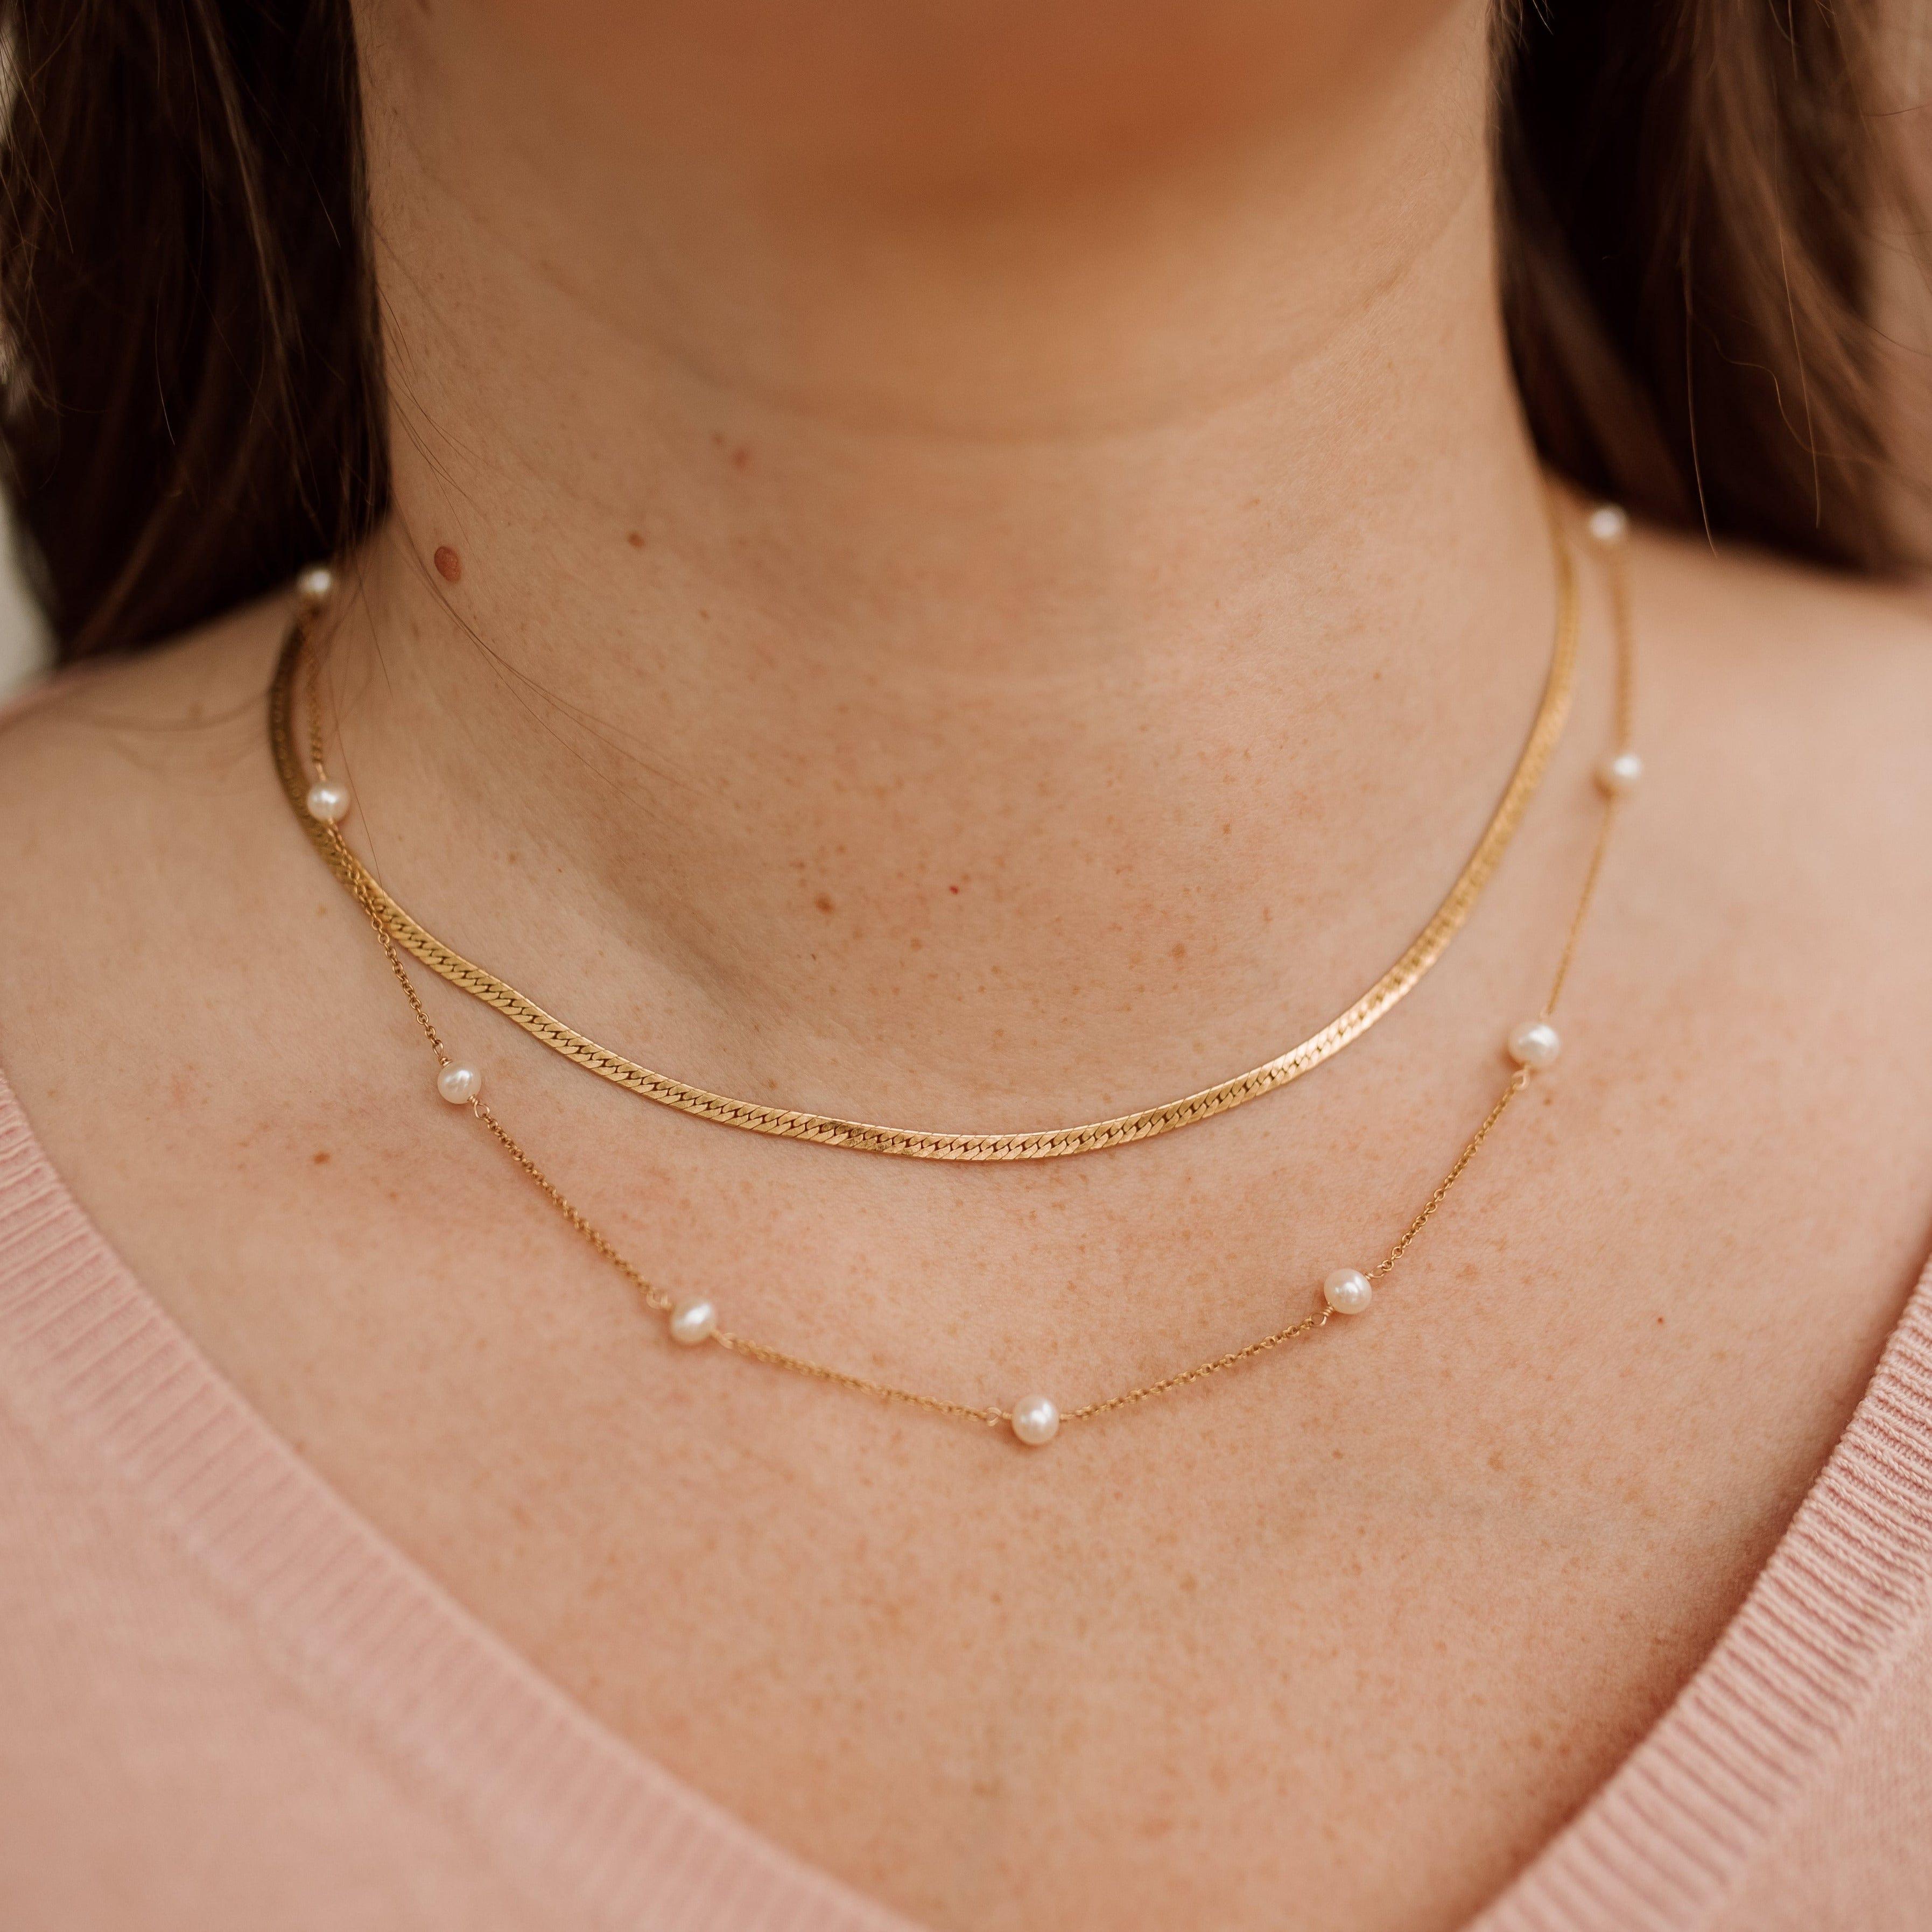 Marie Pearl Chain Necklace - Nolia Jewelry - Meaningful + Sustainably Handcrafted Jewelry